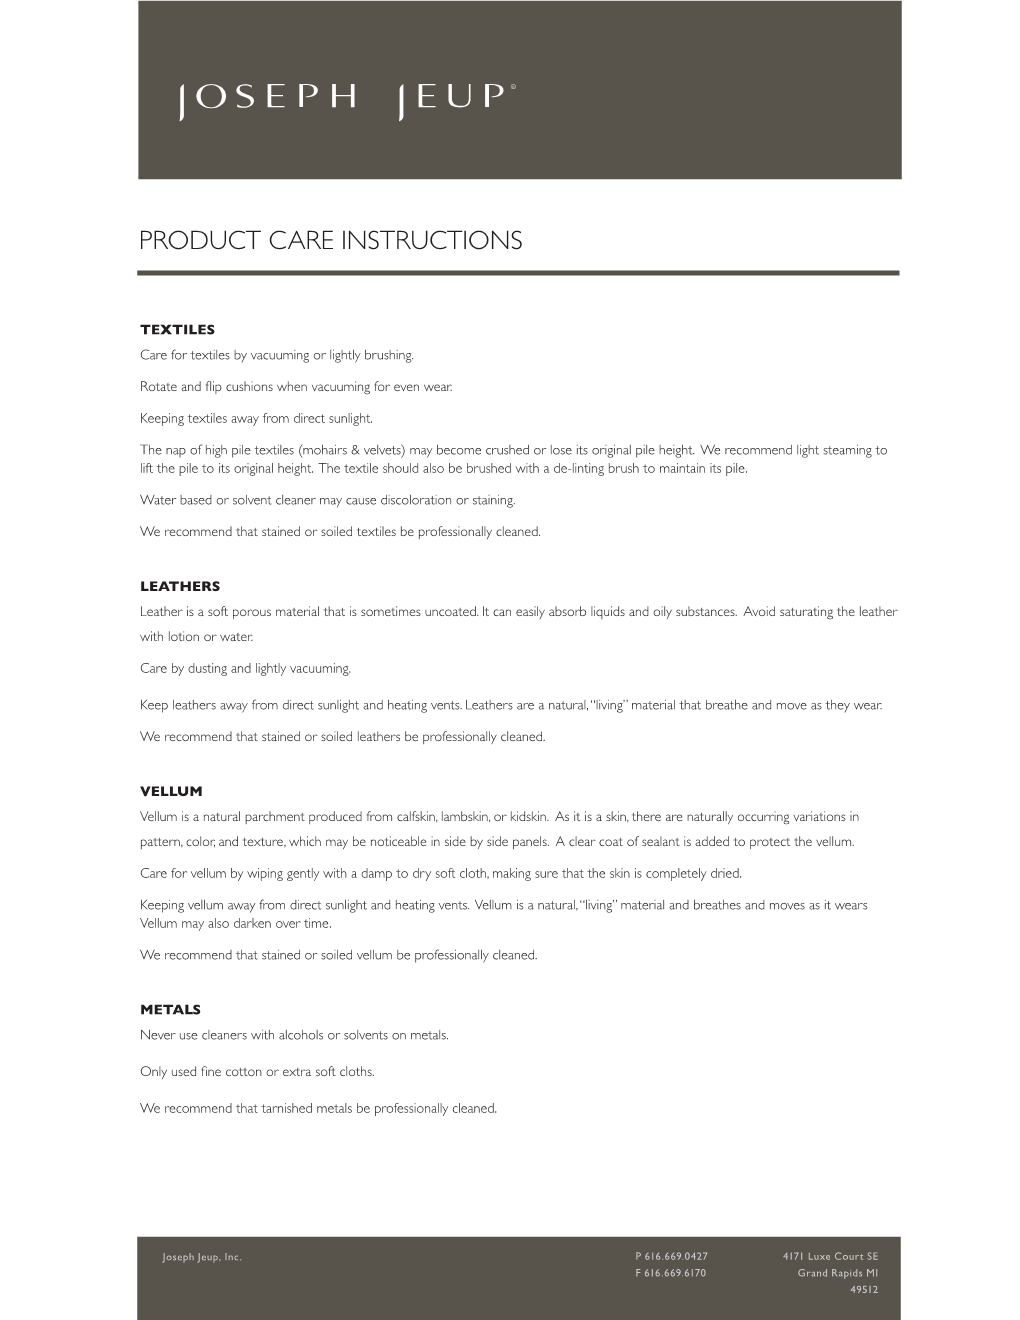 Product Care Instructions